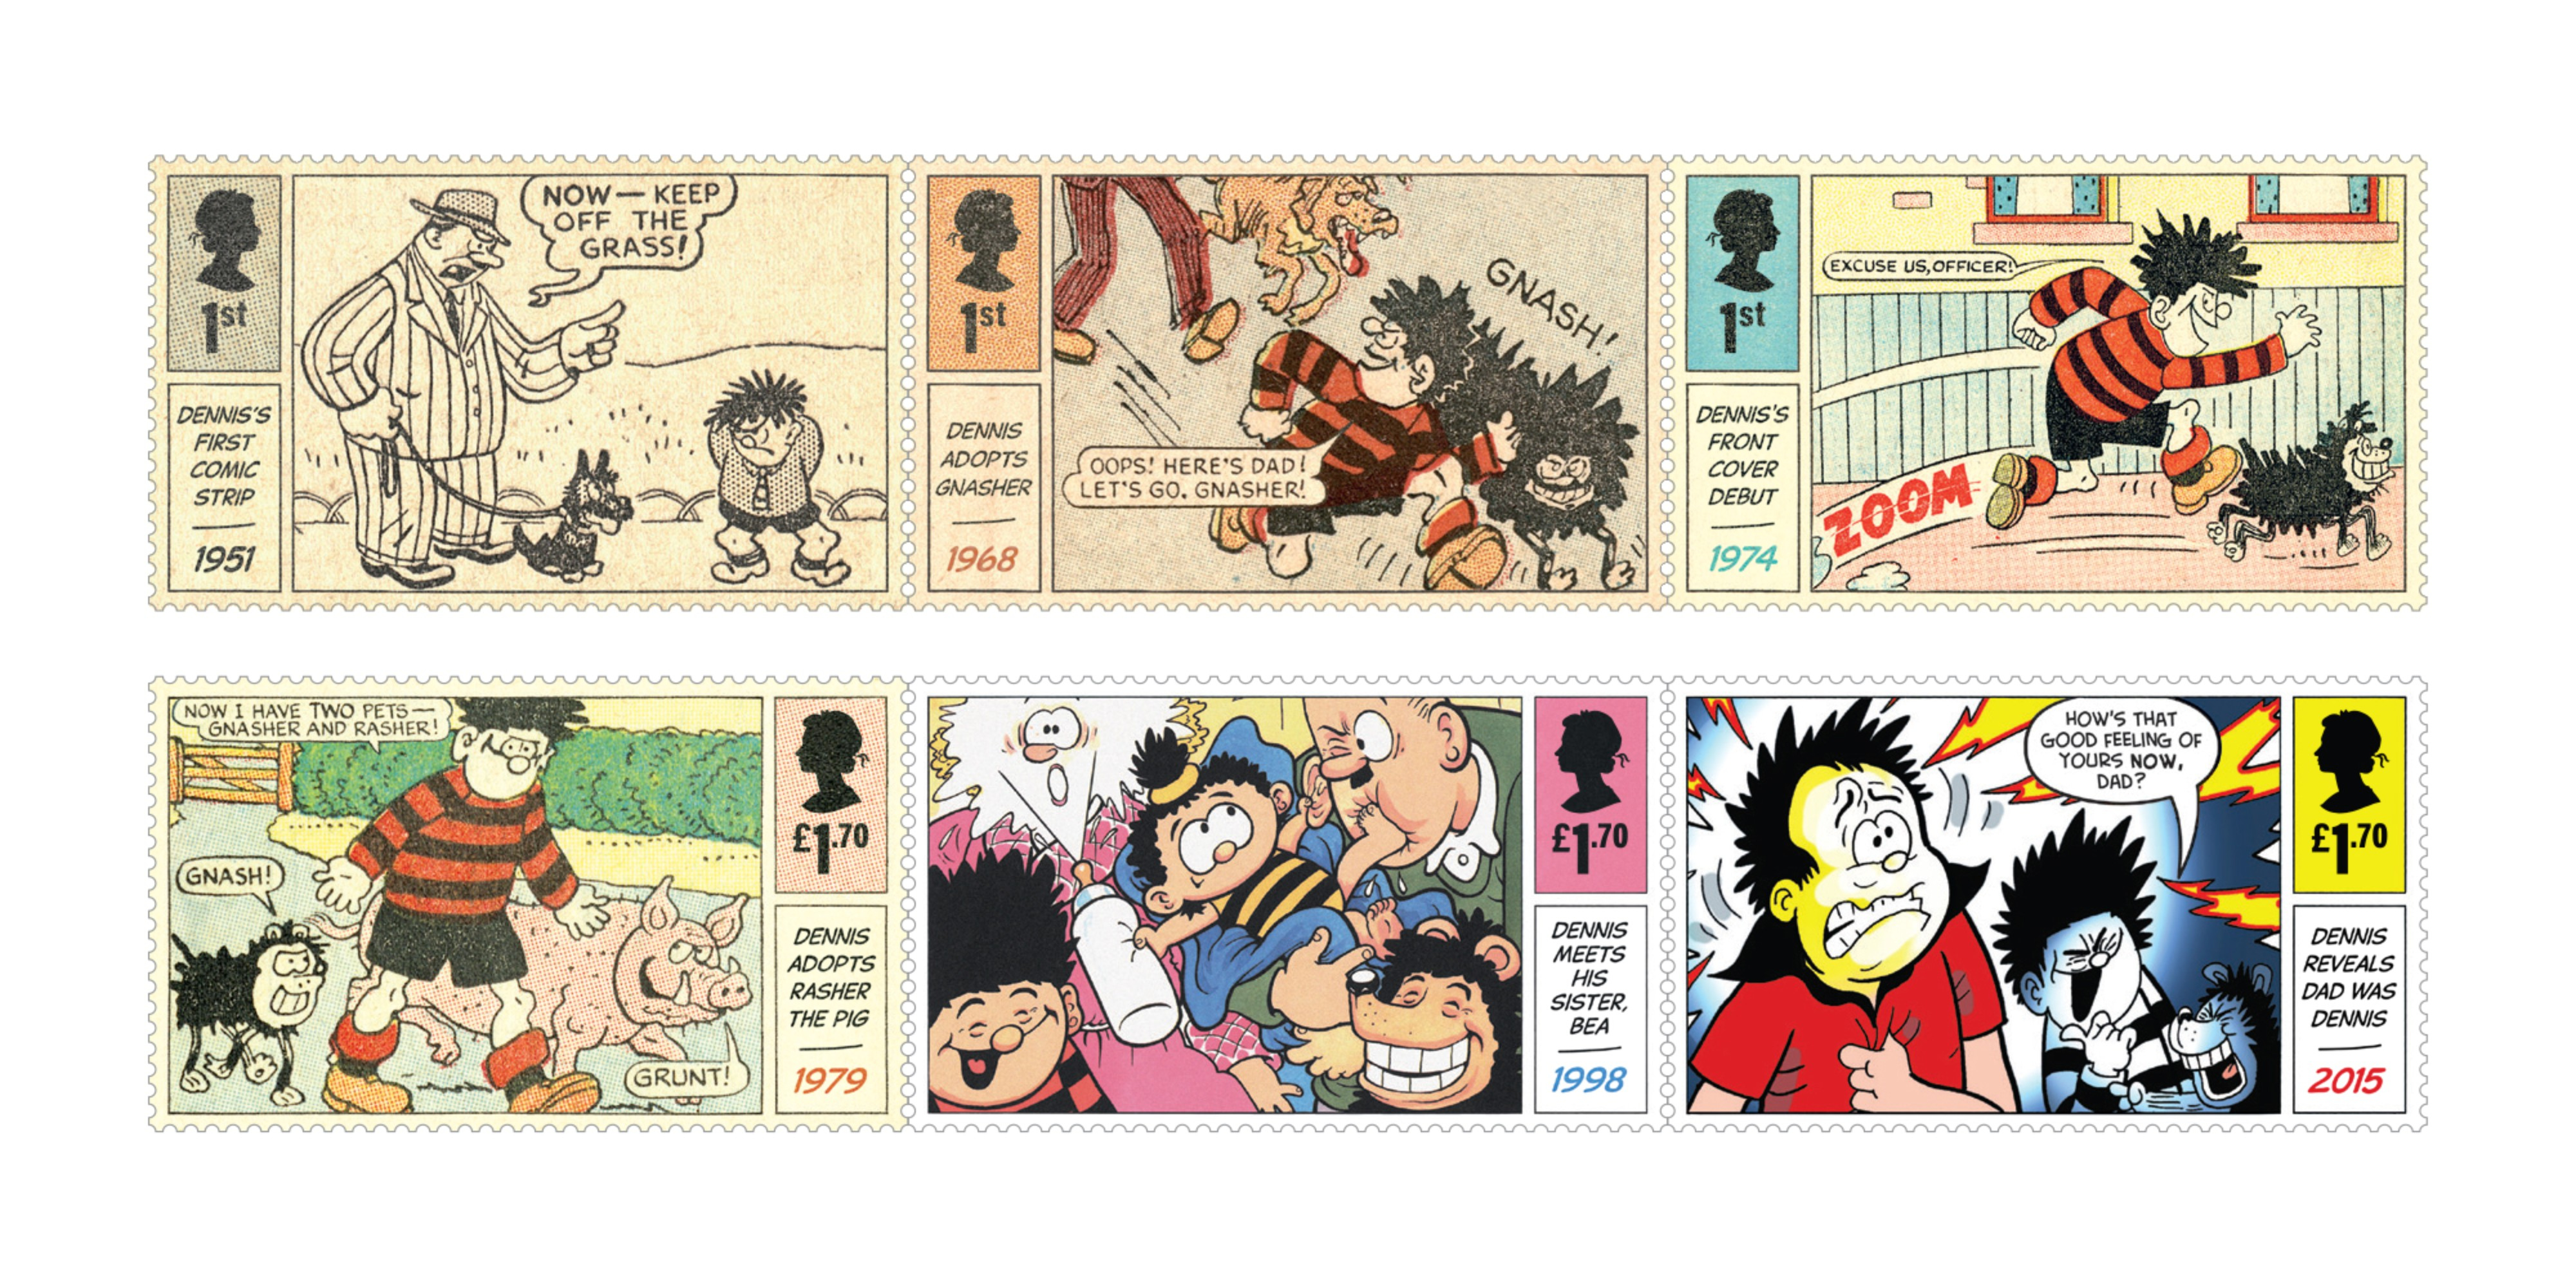 One of a new set of stamps being issued marking 70 years of legendary Beano comic character Dennis the Menace.